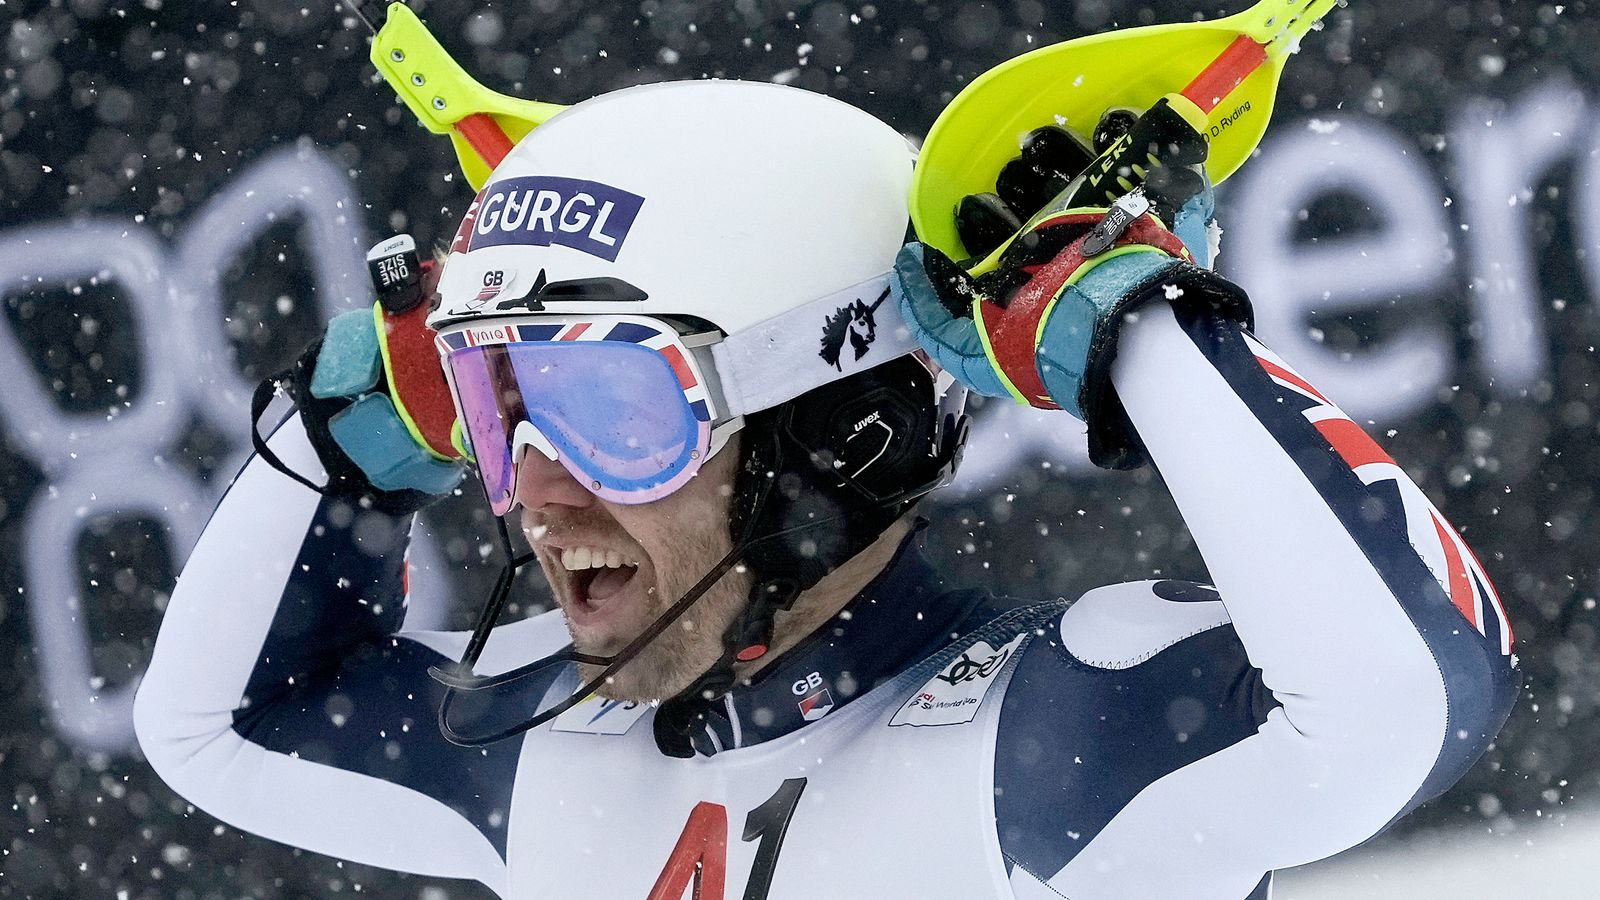 Skier Dave Ryding makes history to win Britain’s first gold in alpine skiing World Cup